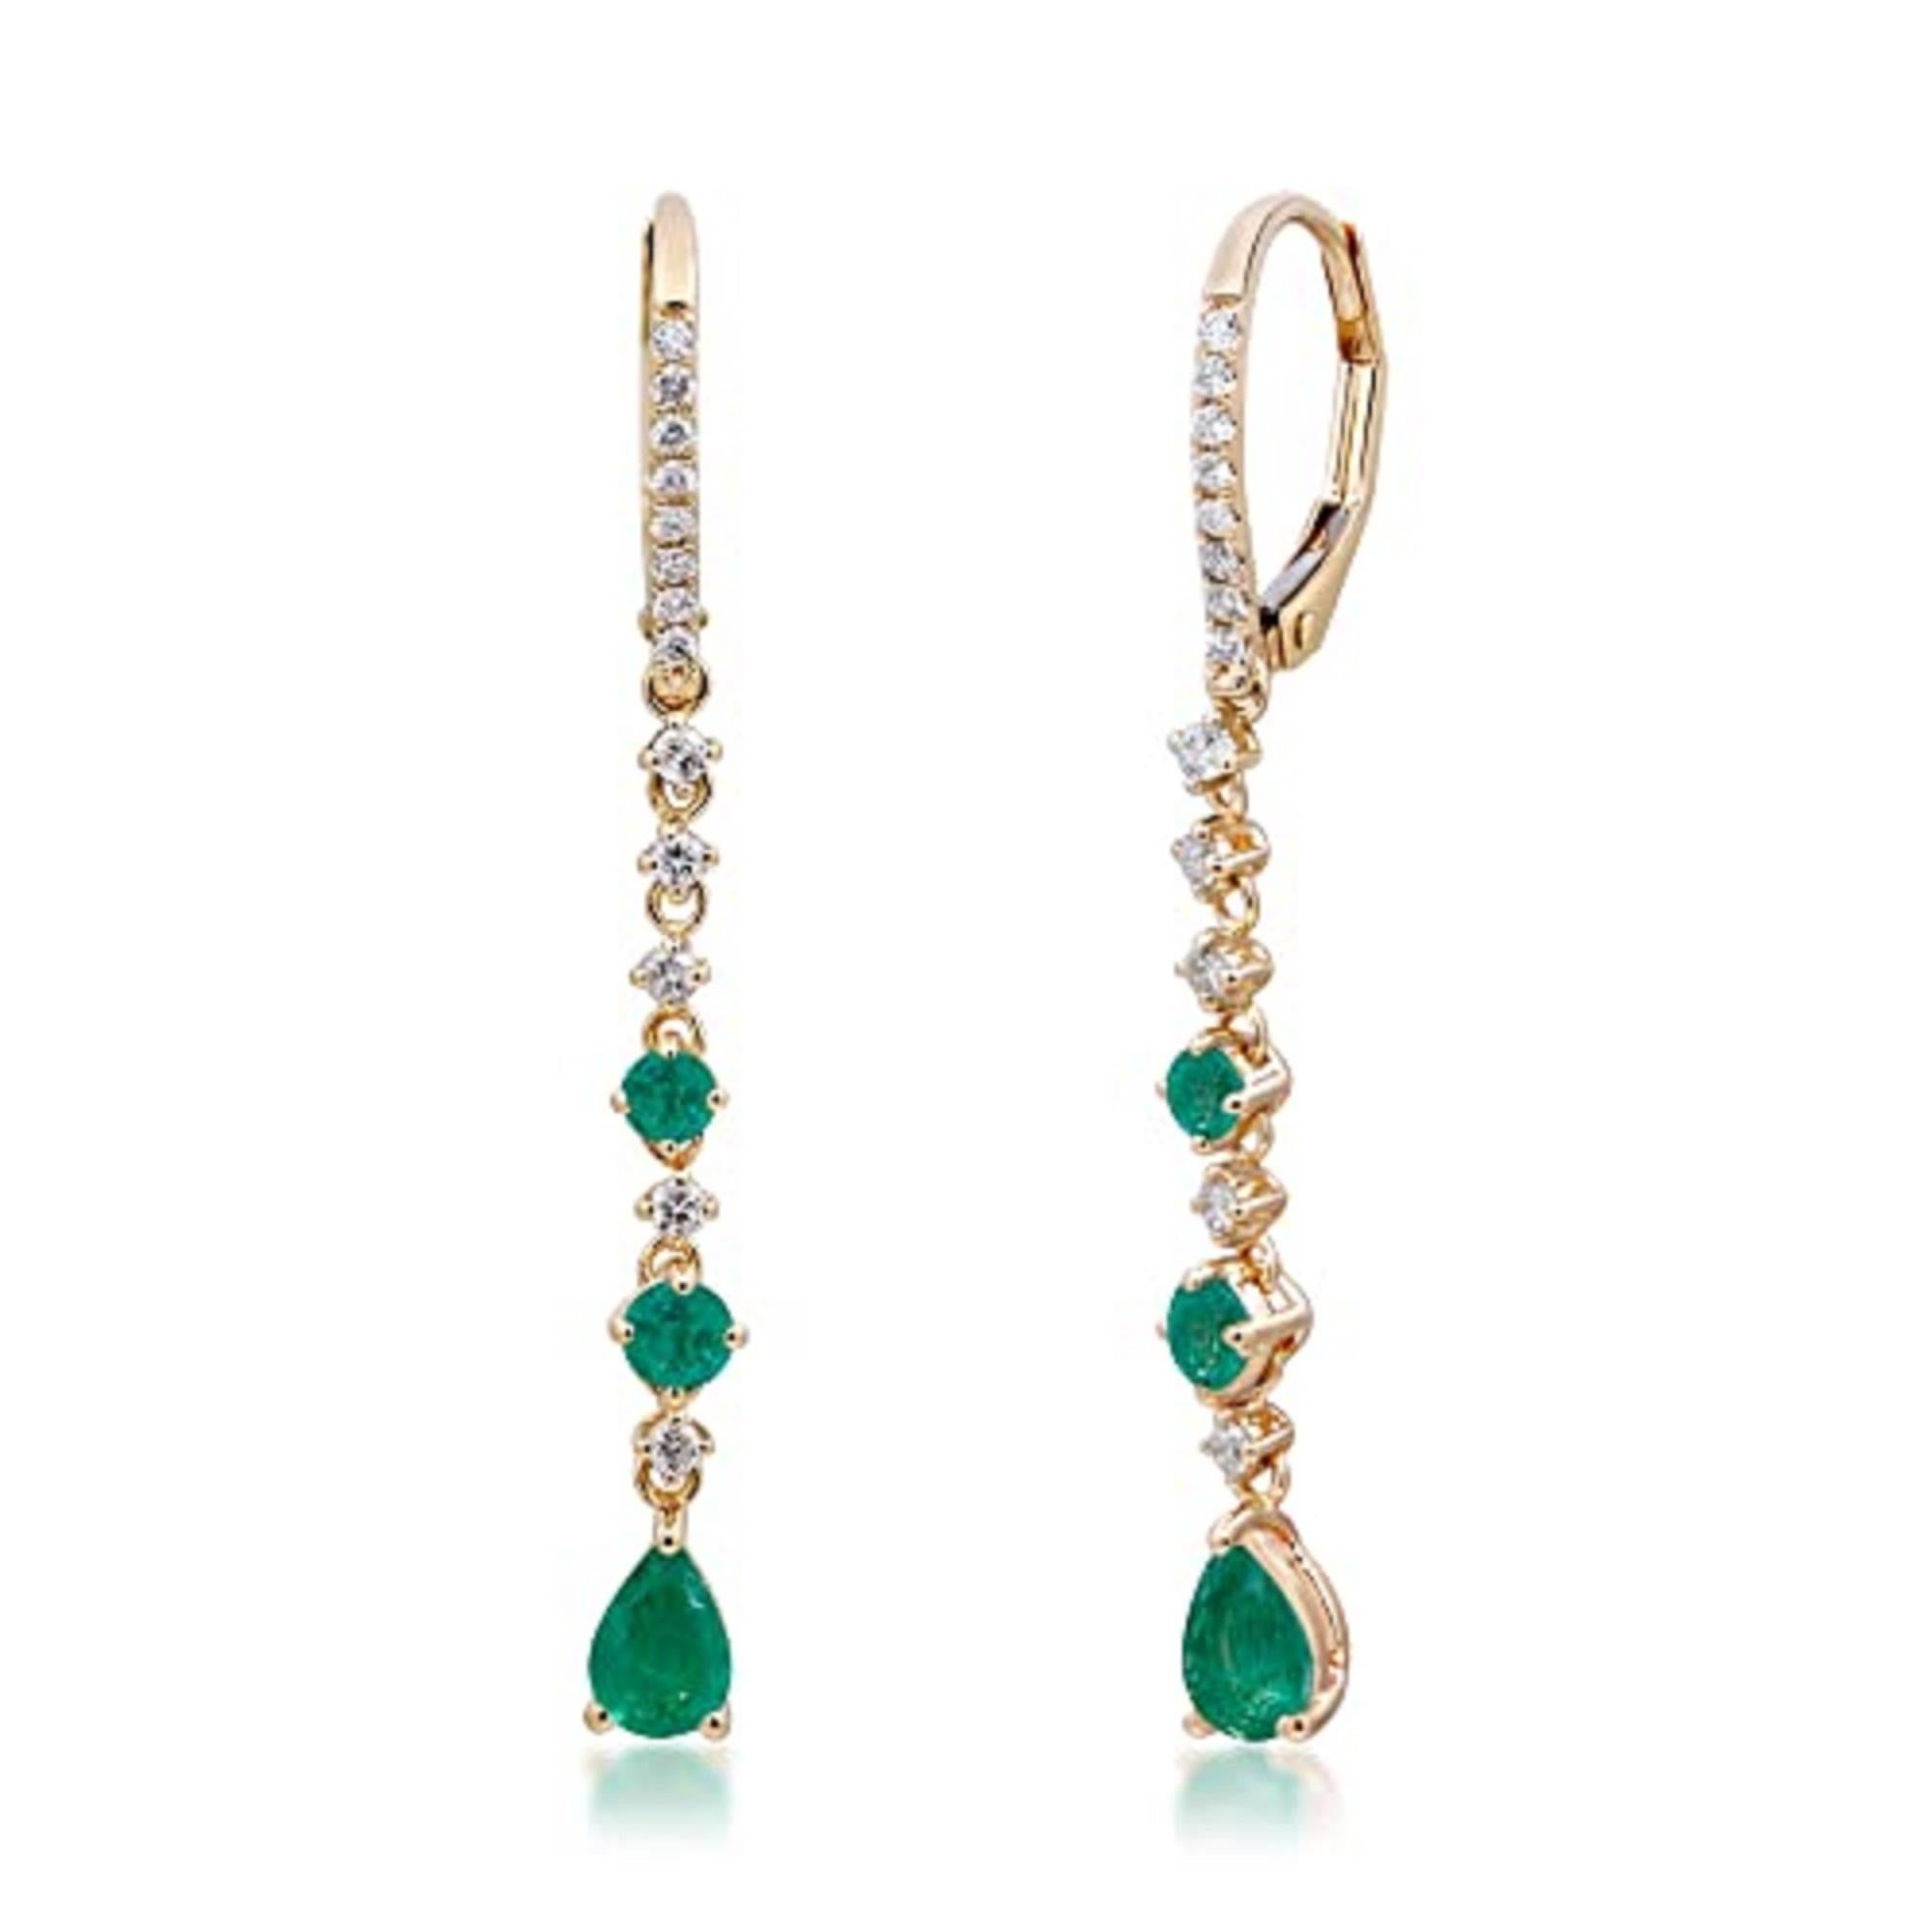 Art Deco 1.0 carat Pear, Round-Cut Emerald With Diamond Accents 14K Yellow Gold Earring. For Sale